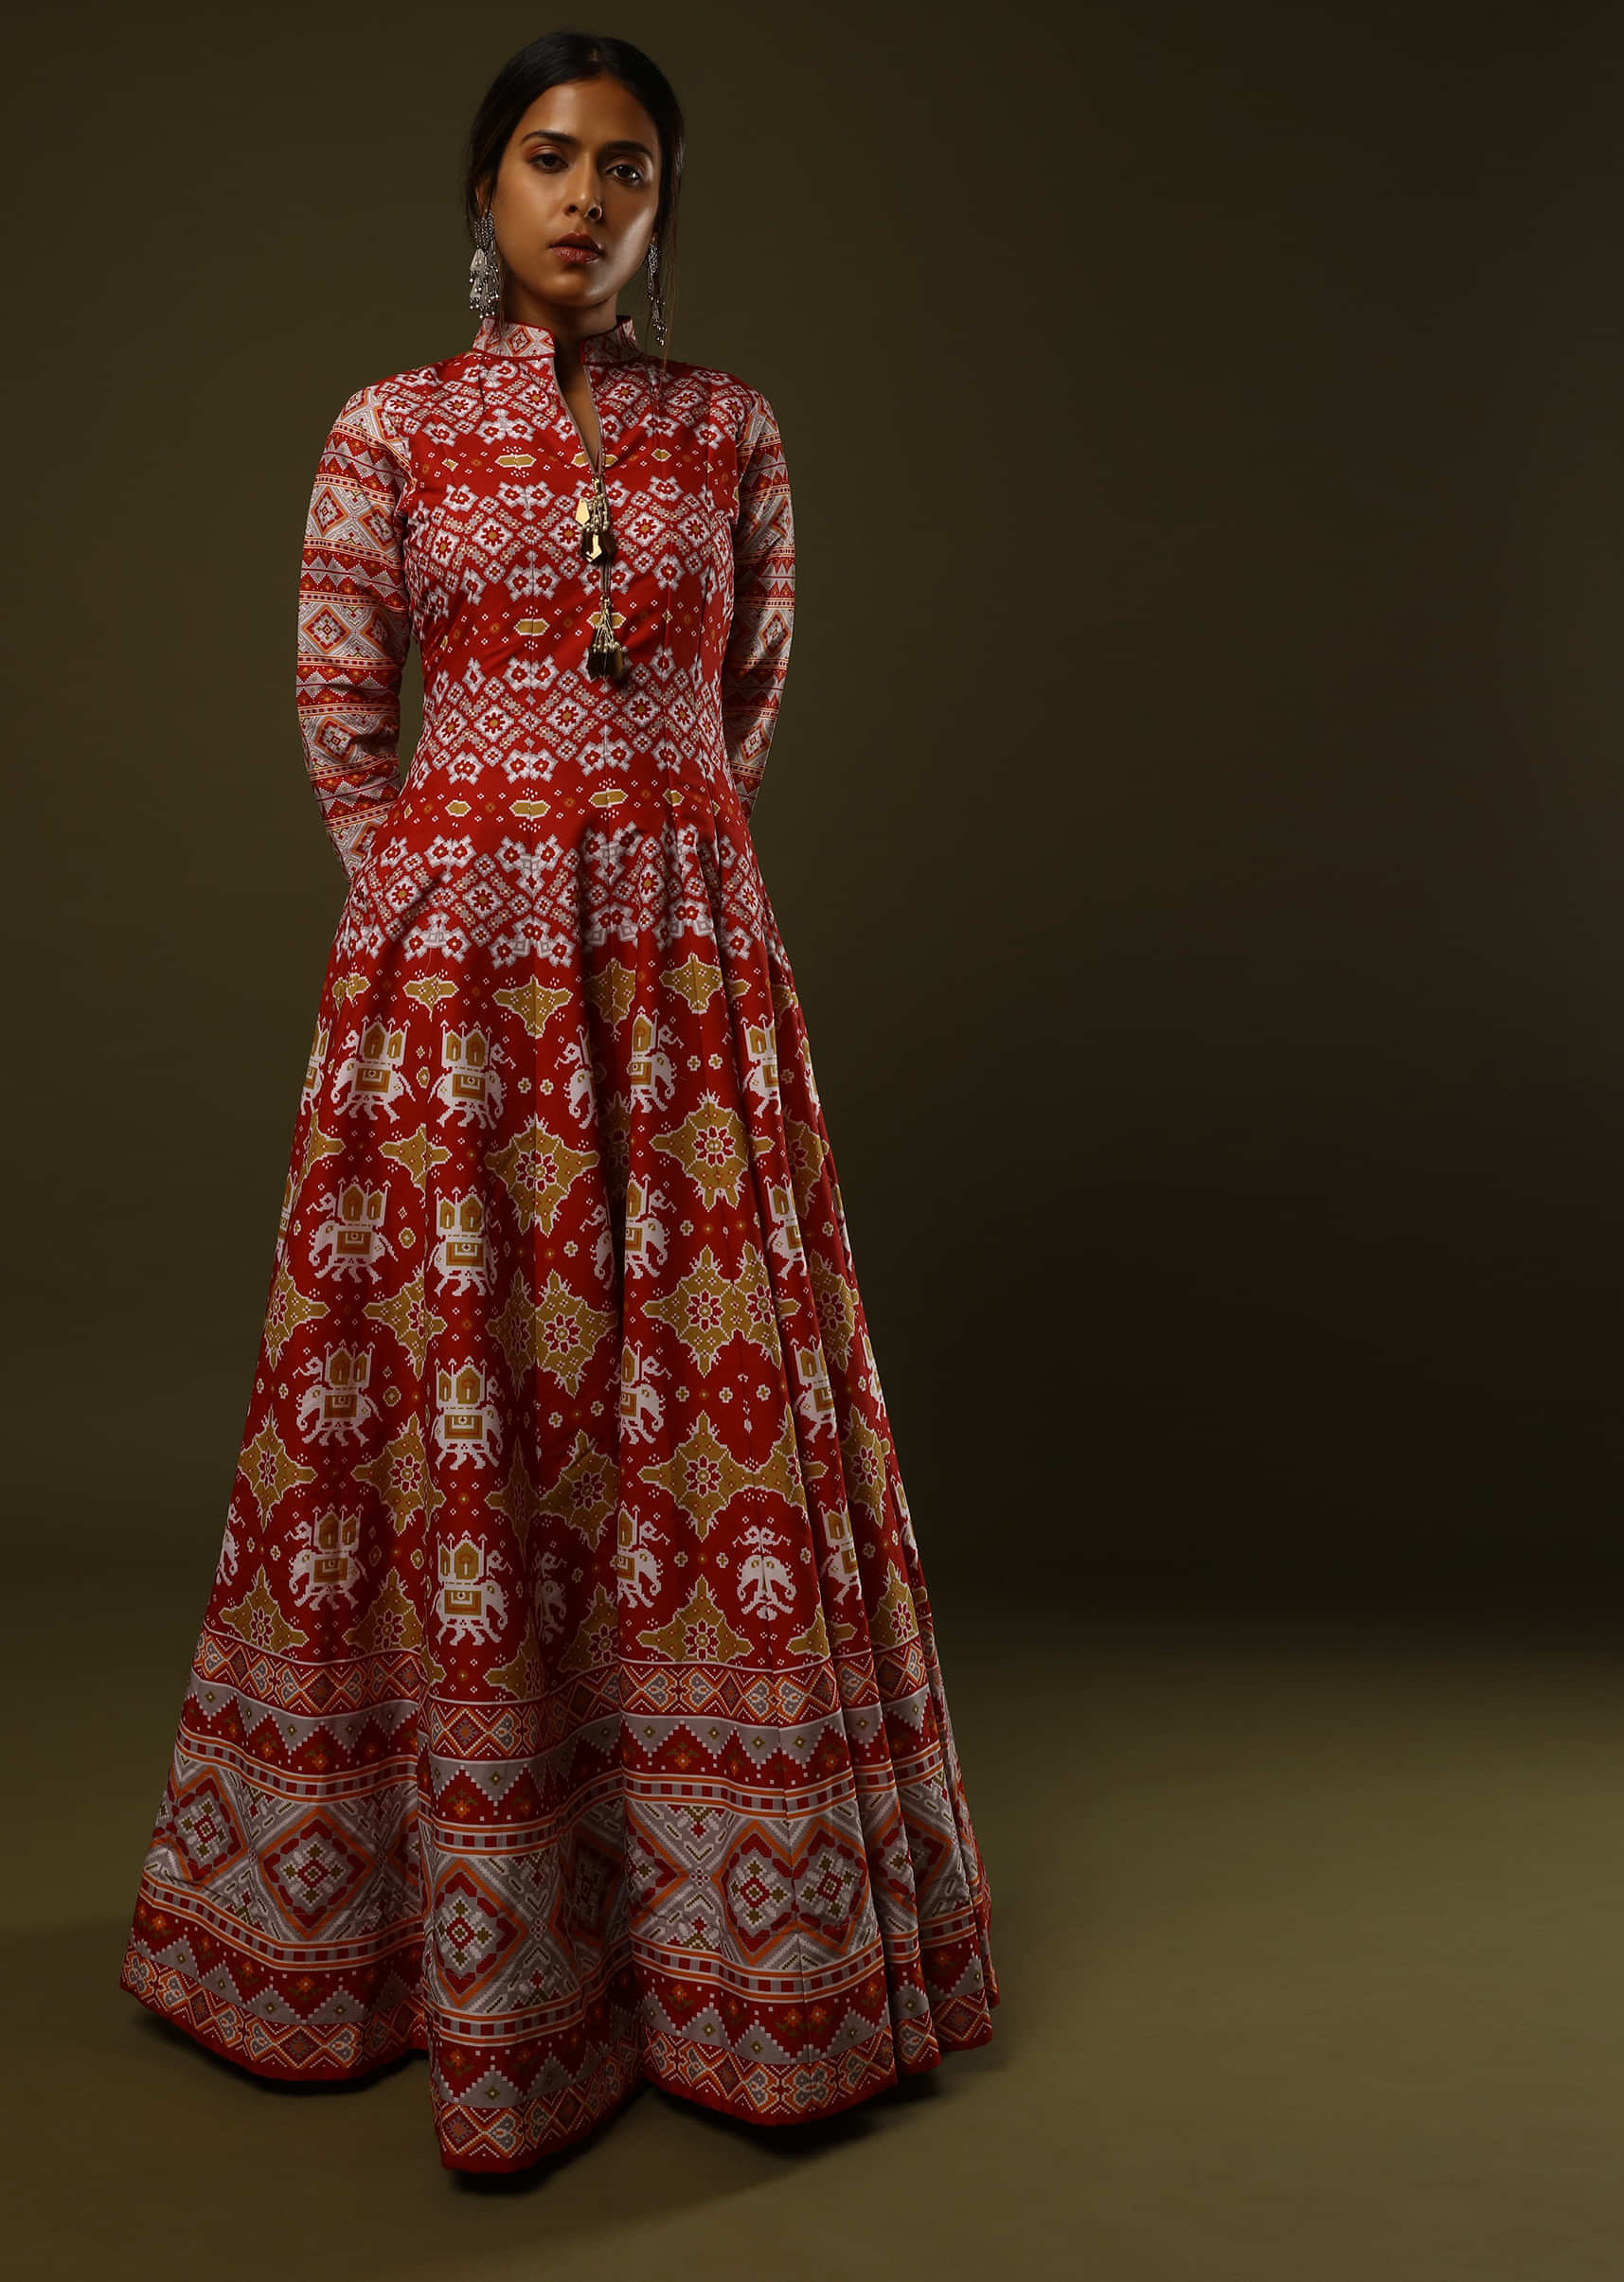 Apple Red Anarkali Suit In Cotton Silk With Patola Print All Over And Grey Patola Border  - Kalki Fashion